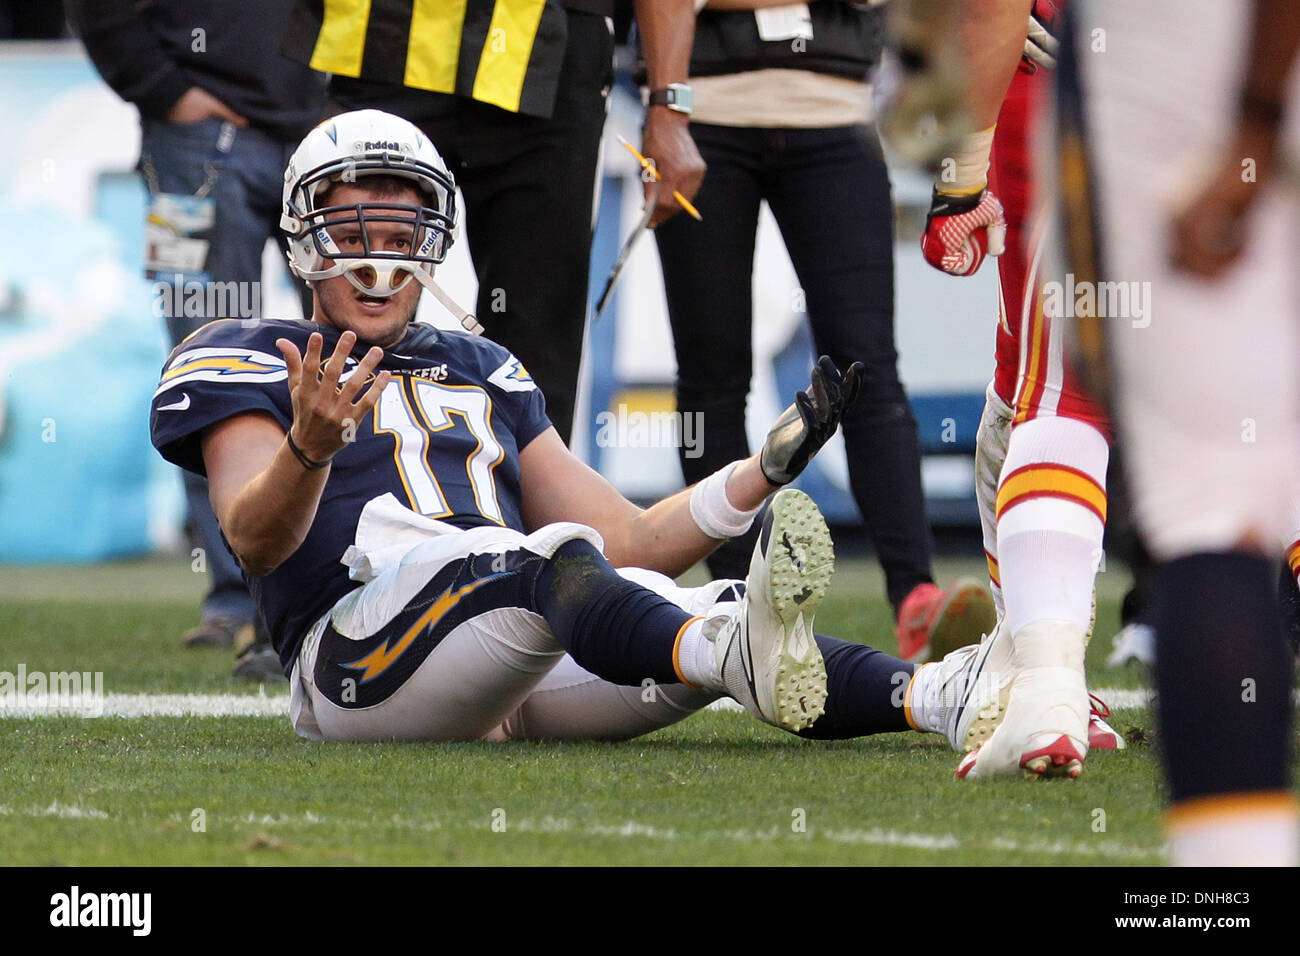 San Diego, California, USA. 29th Dec, 2013. 12/29/2013 San Diego | San Diego Chargers vs. Kansas City Chiefs at Qualcomm Stadium. Philip Rivers looking for a call after being roughed up in the fourth quarter. | Photo Sean M. Haffey UT San Diego. Credit:  U-T San Diego/ZUMAPRESS.com/Alamy Live News Stock Photo